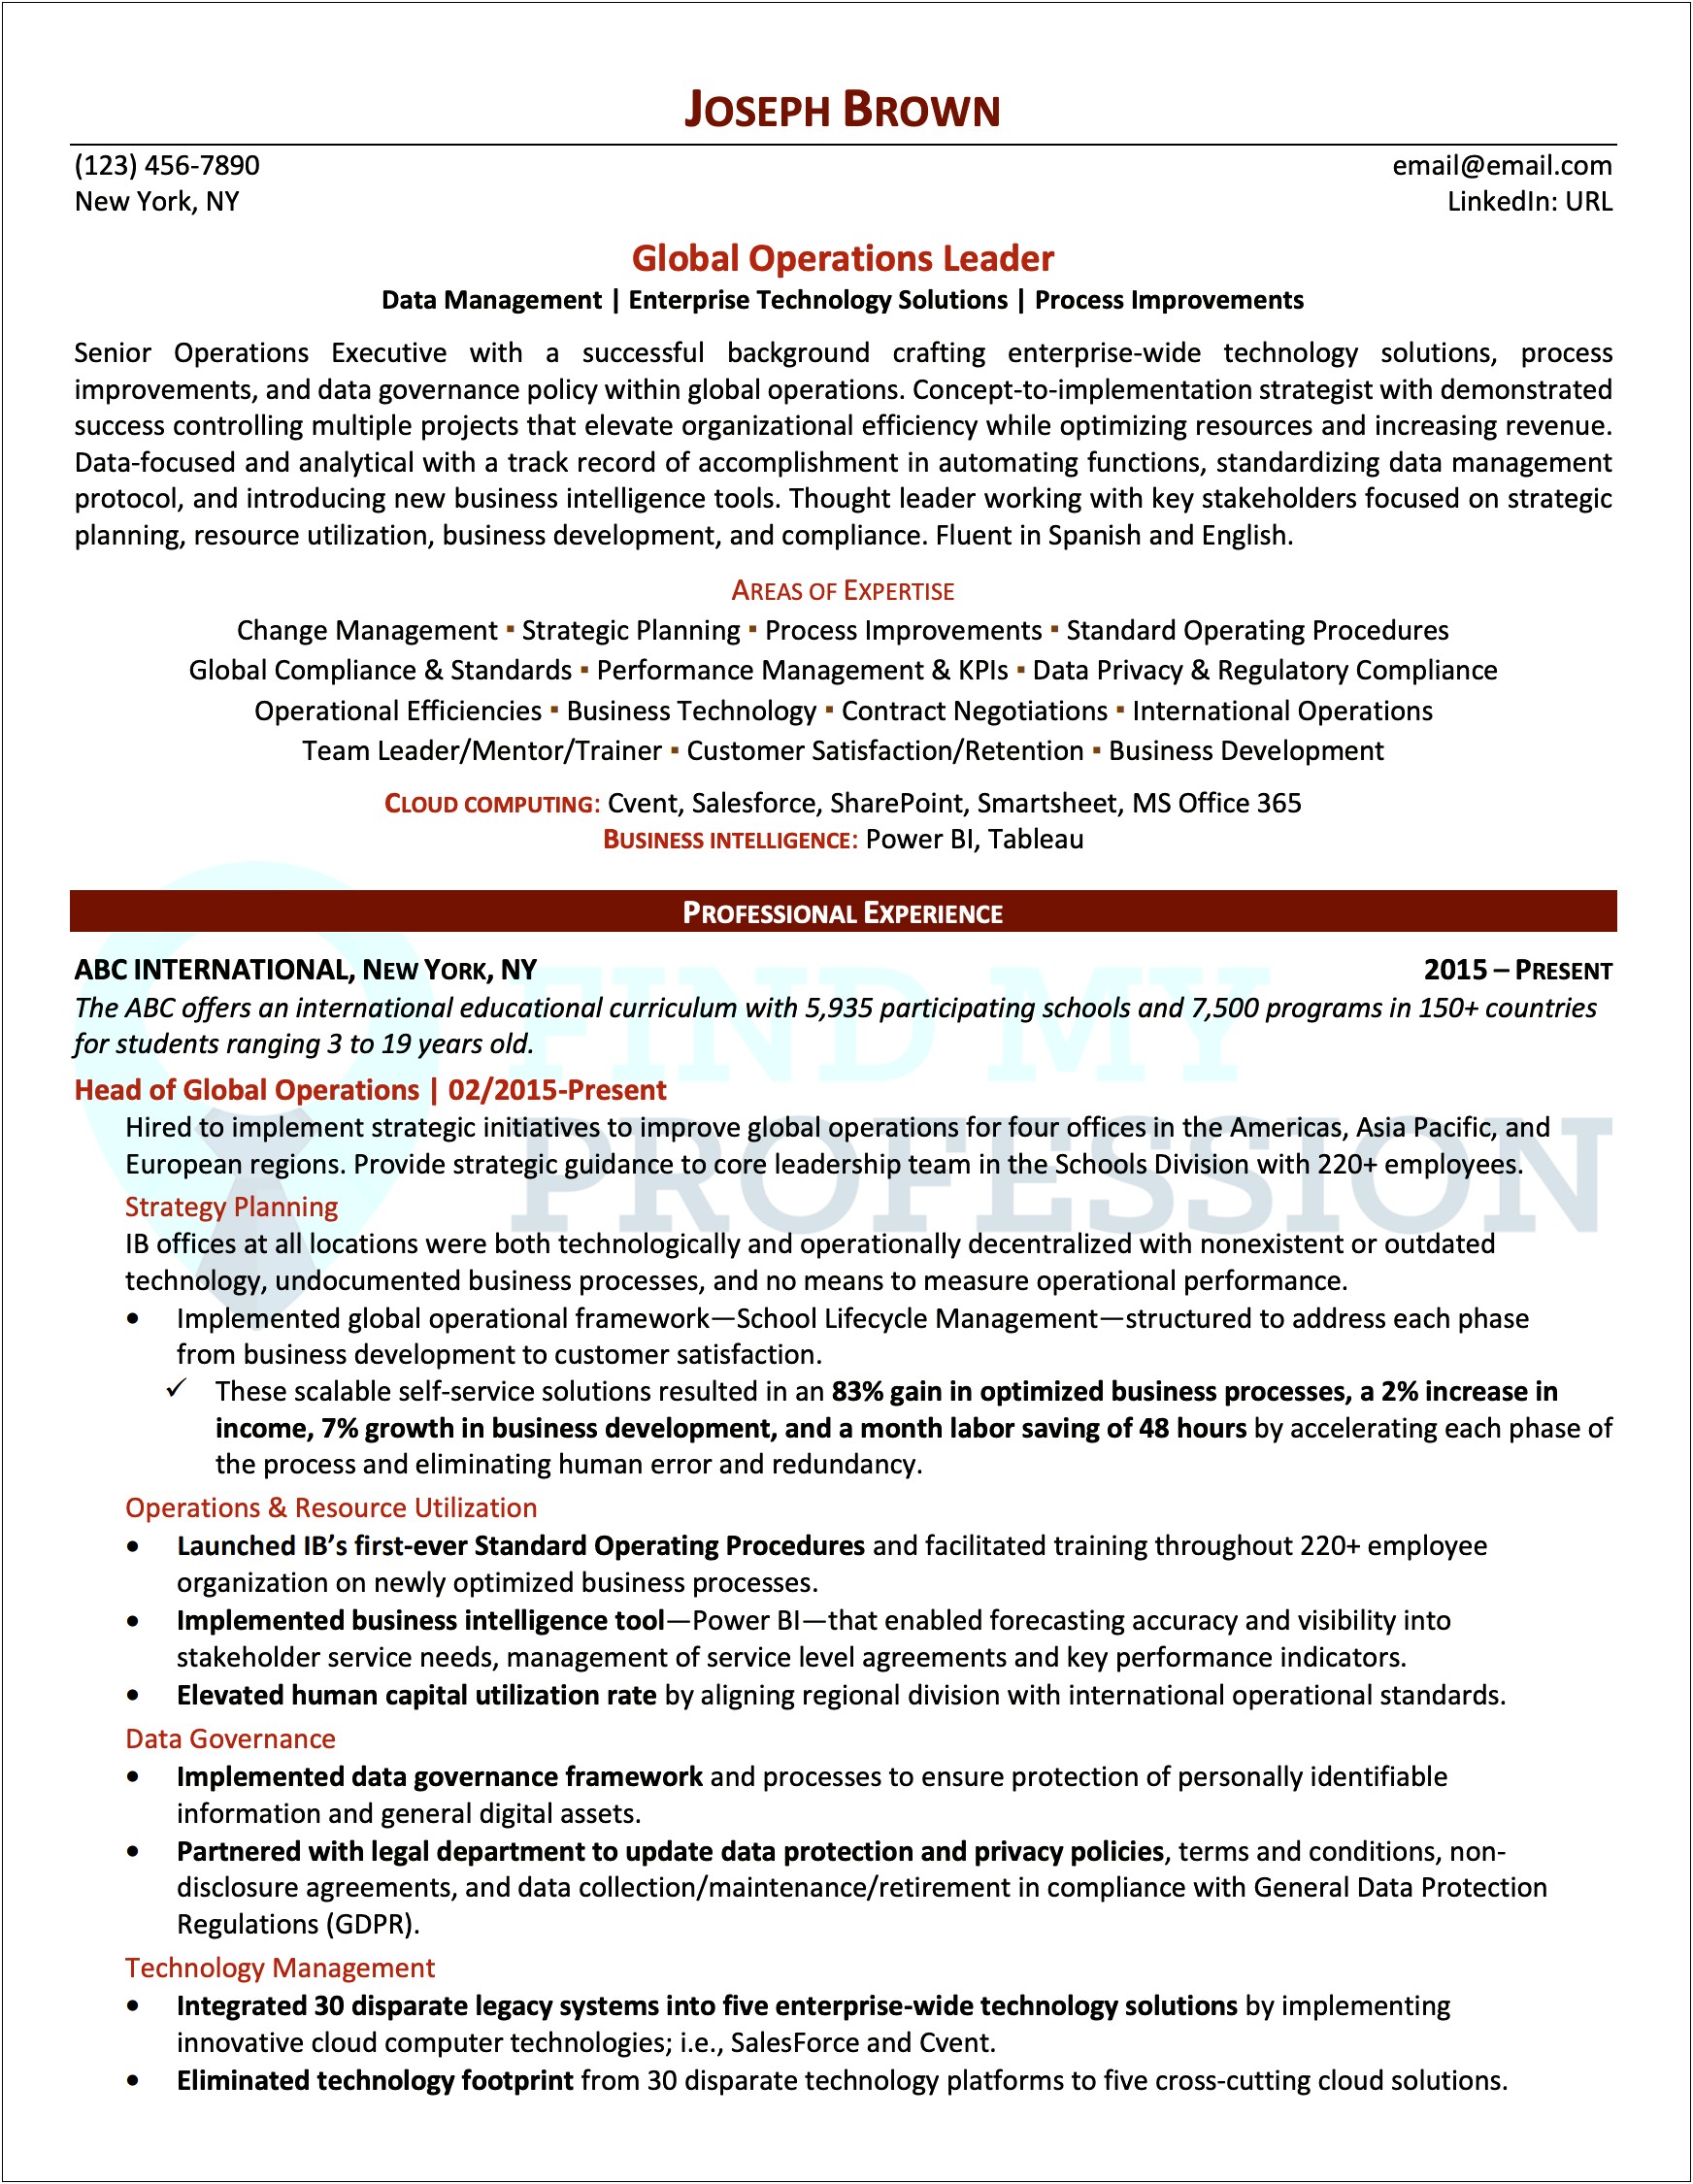 Best Resume Style For Executive